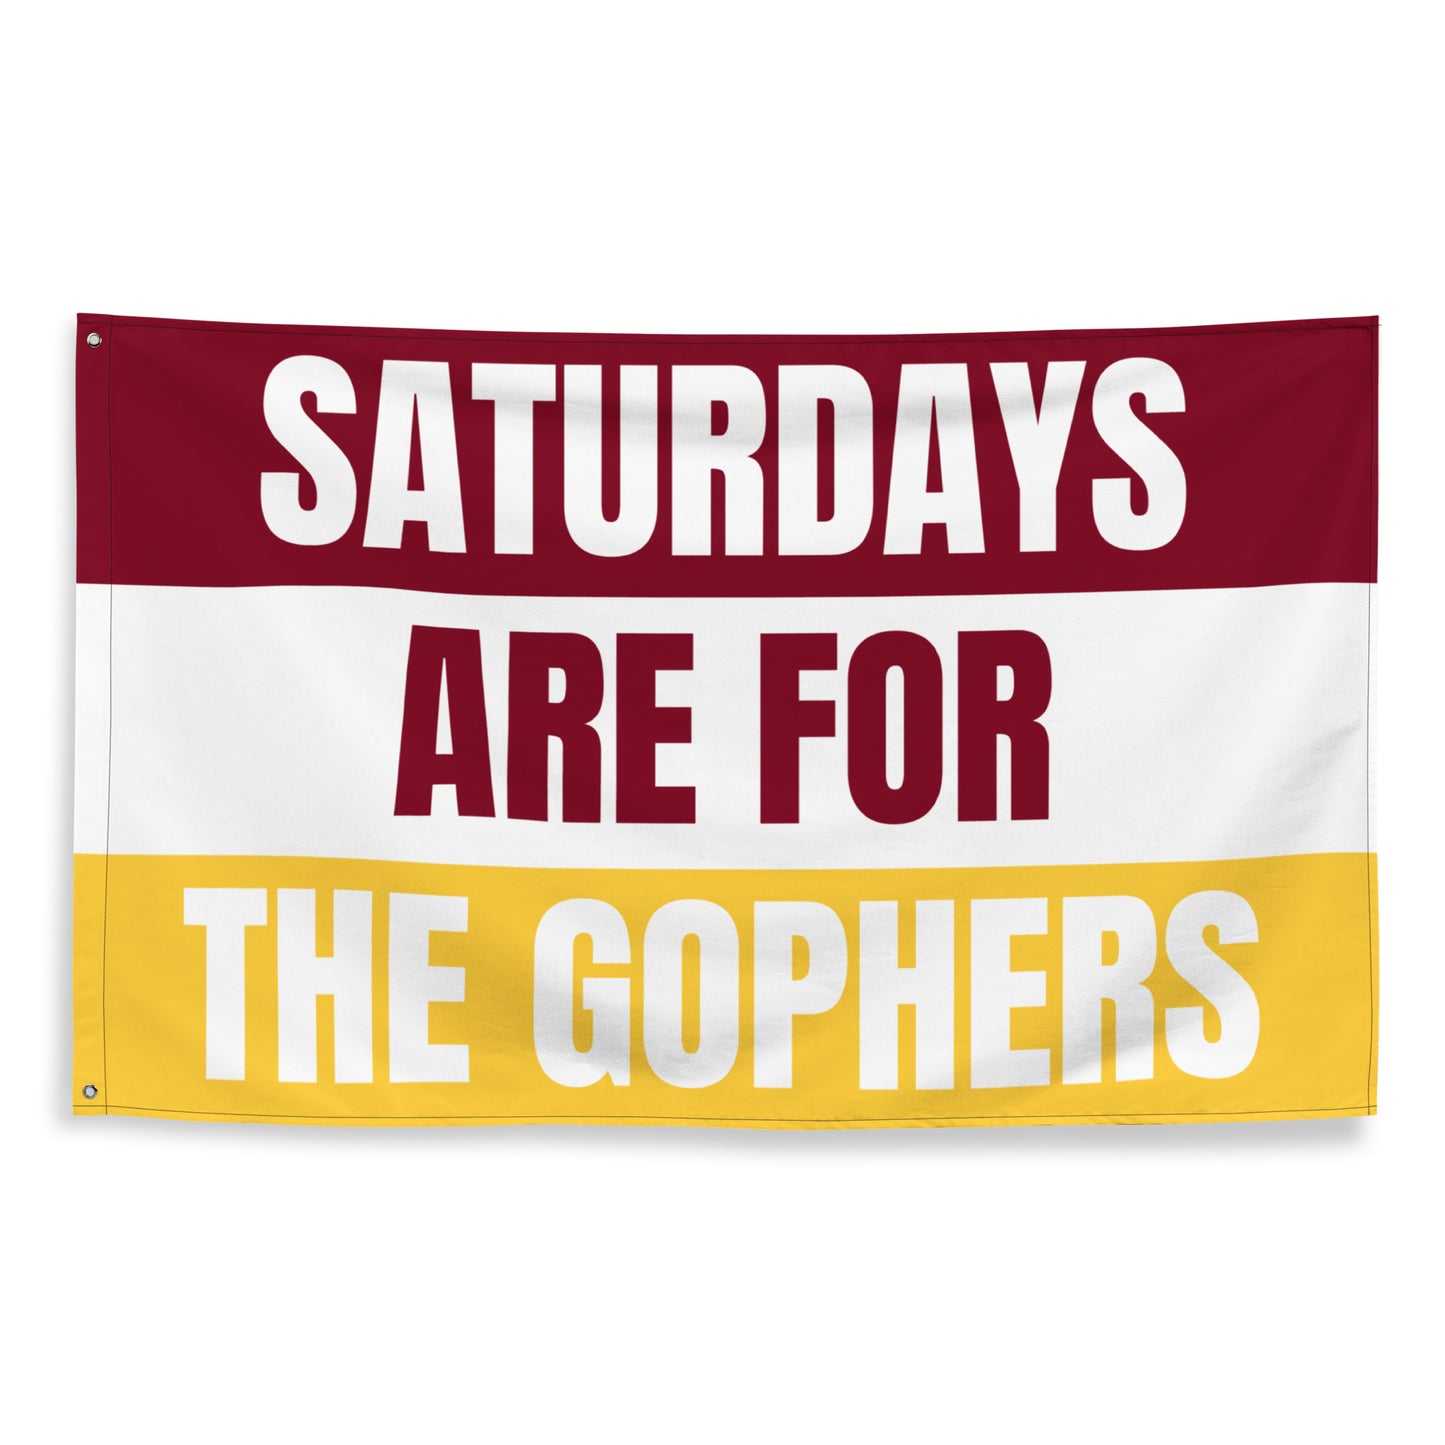 Minnesota Gophers Banner, Saturdays are for the Gophers, Great Birthday Gift for Game room or Mancave, University of Minnesota